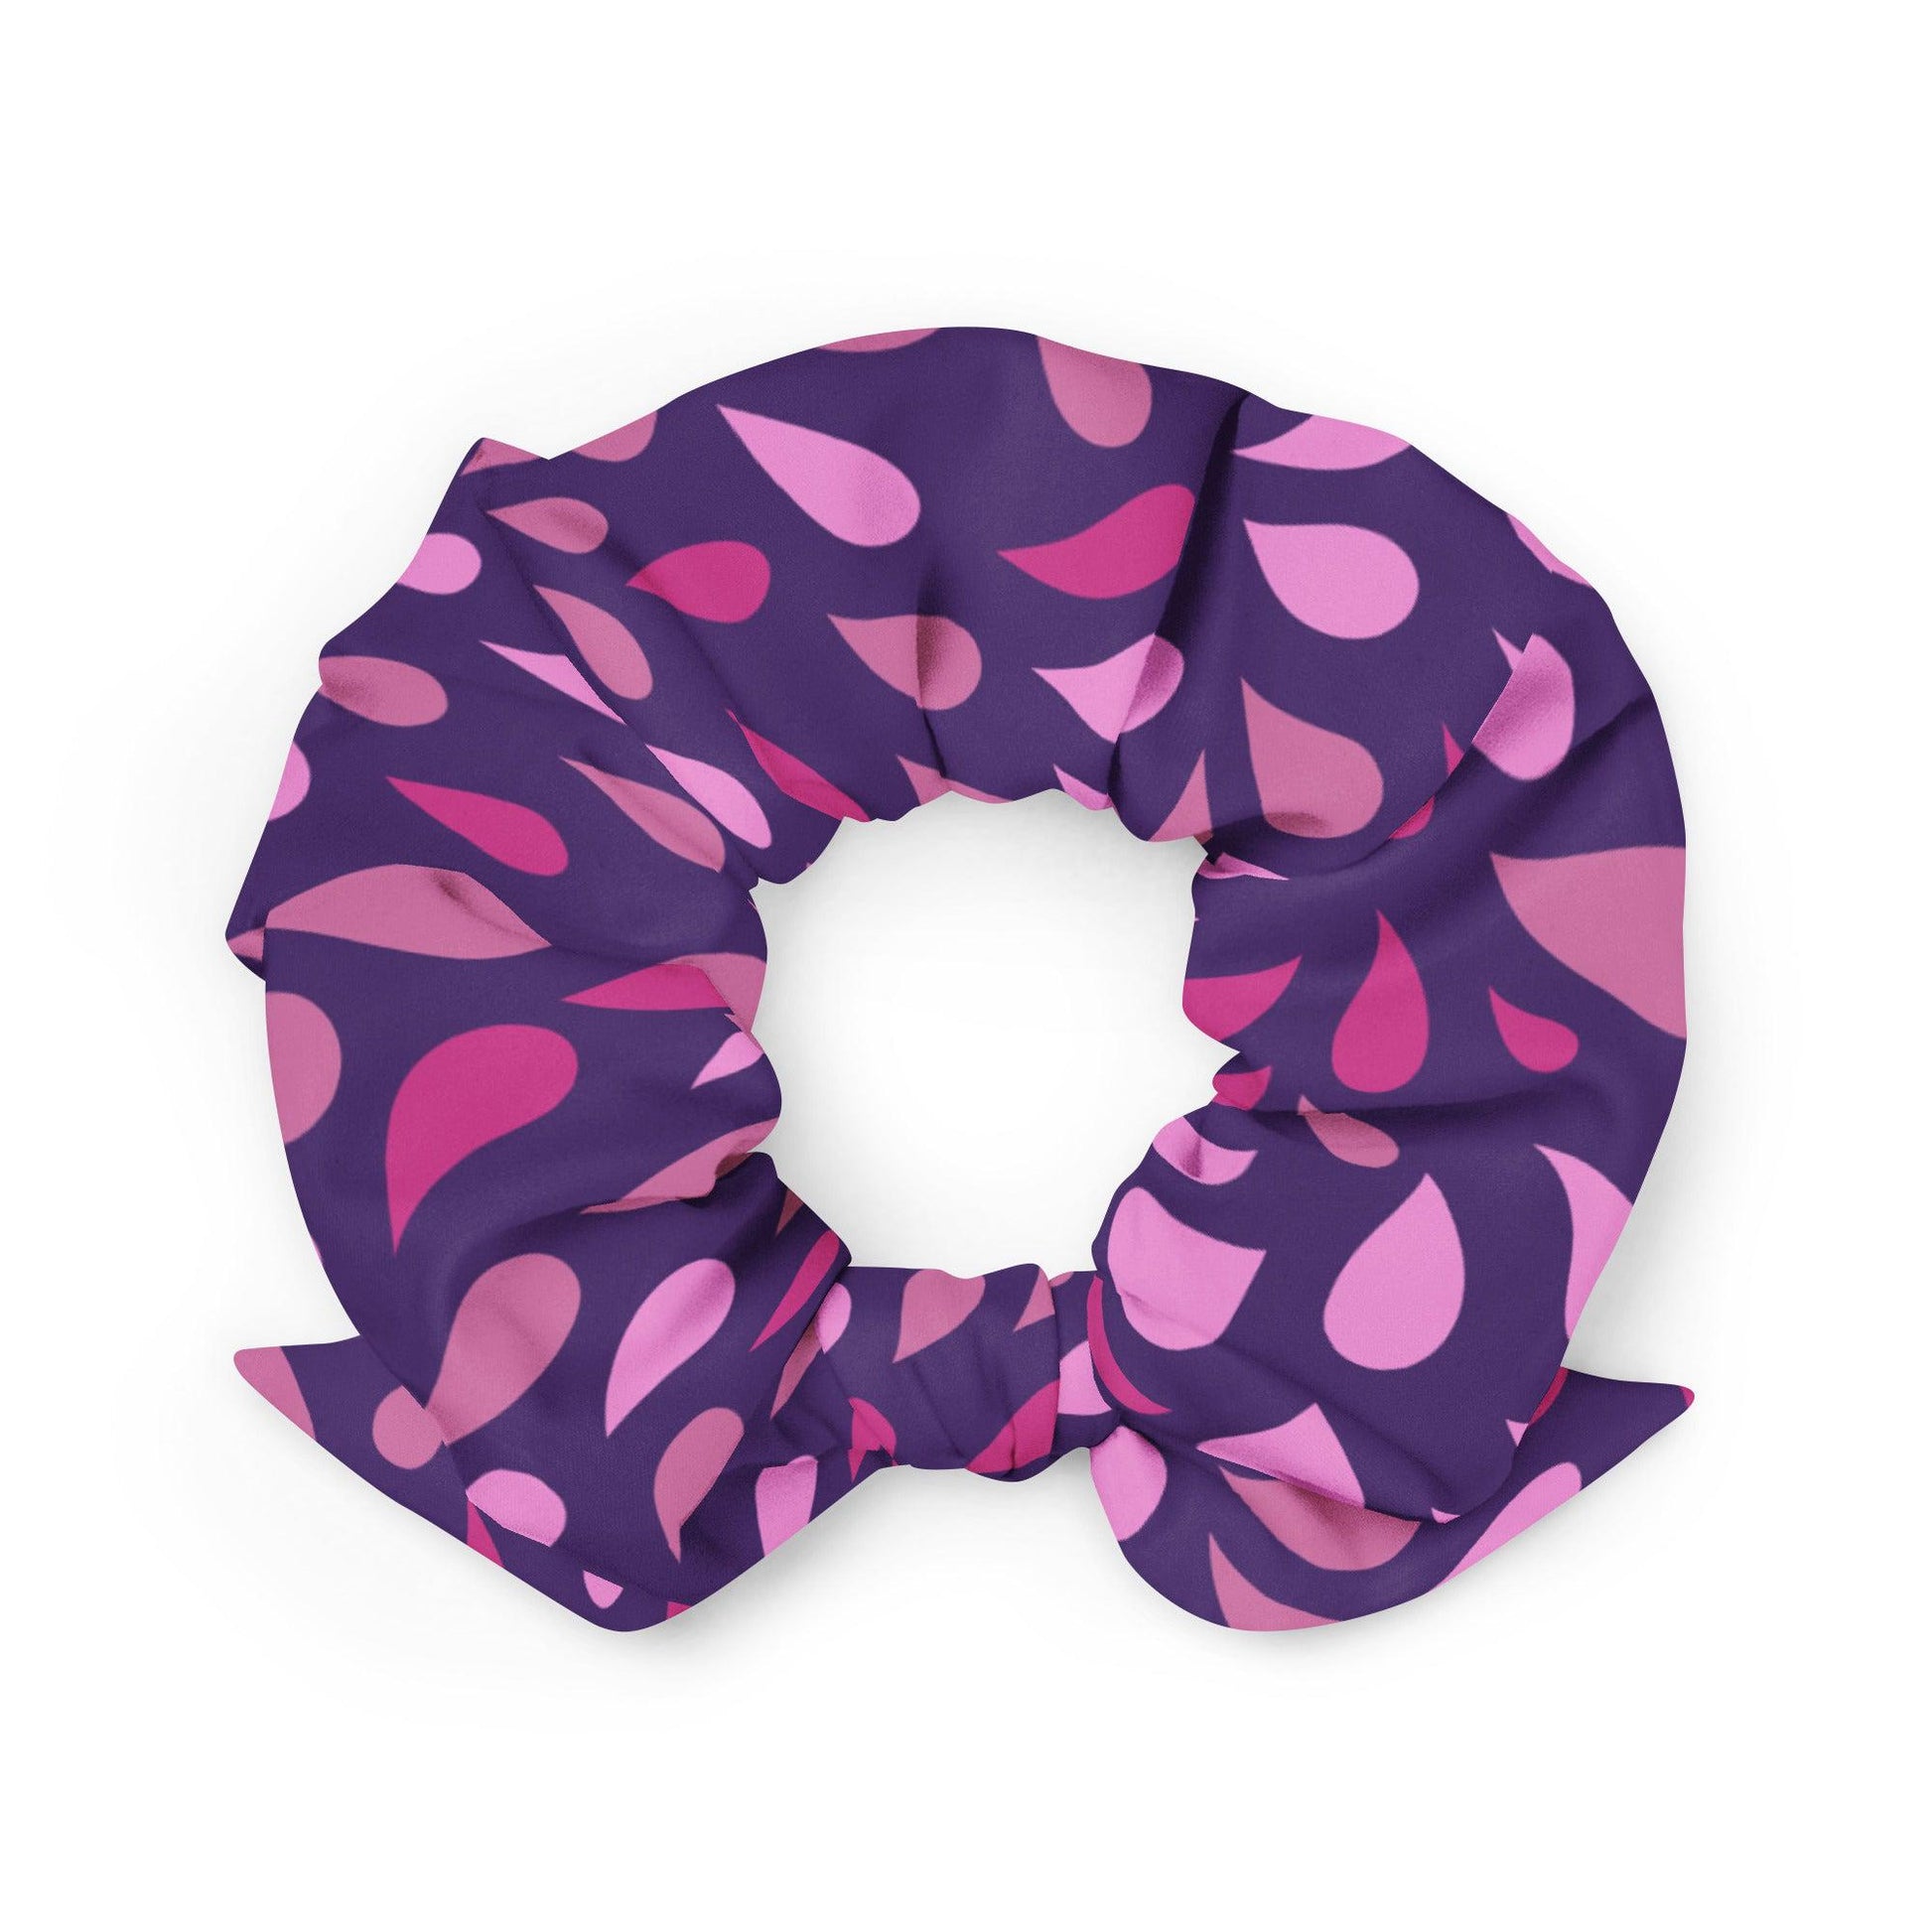 Droplets of Elegance: Embrace Sustainable Style with Our Recycled Scrunchie Featuring Chic Droplet Prints